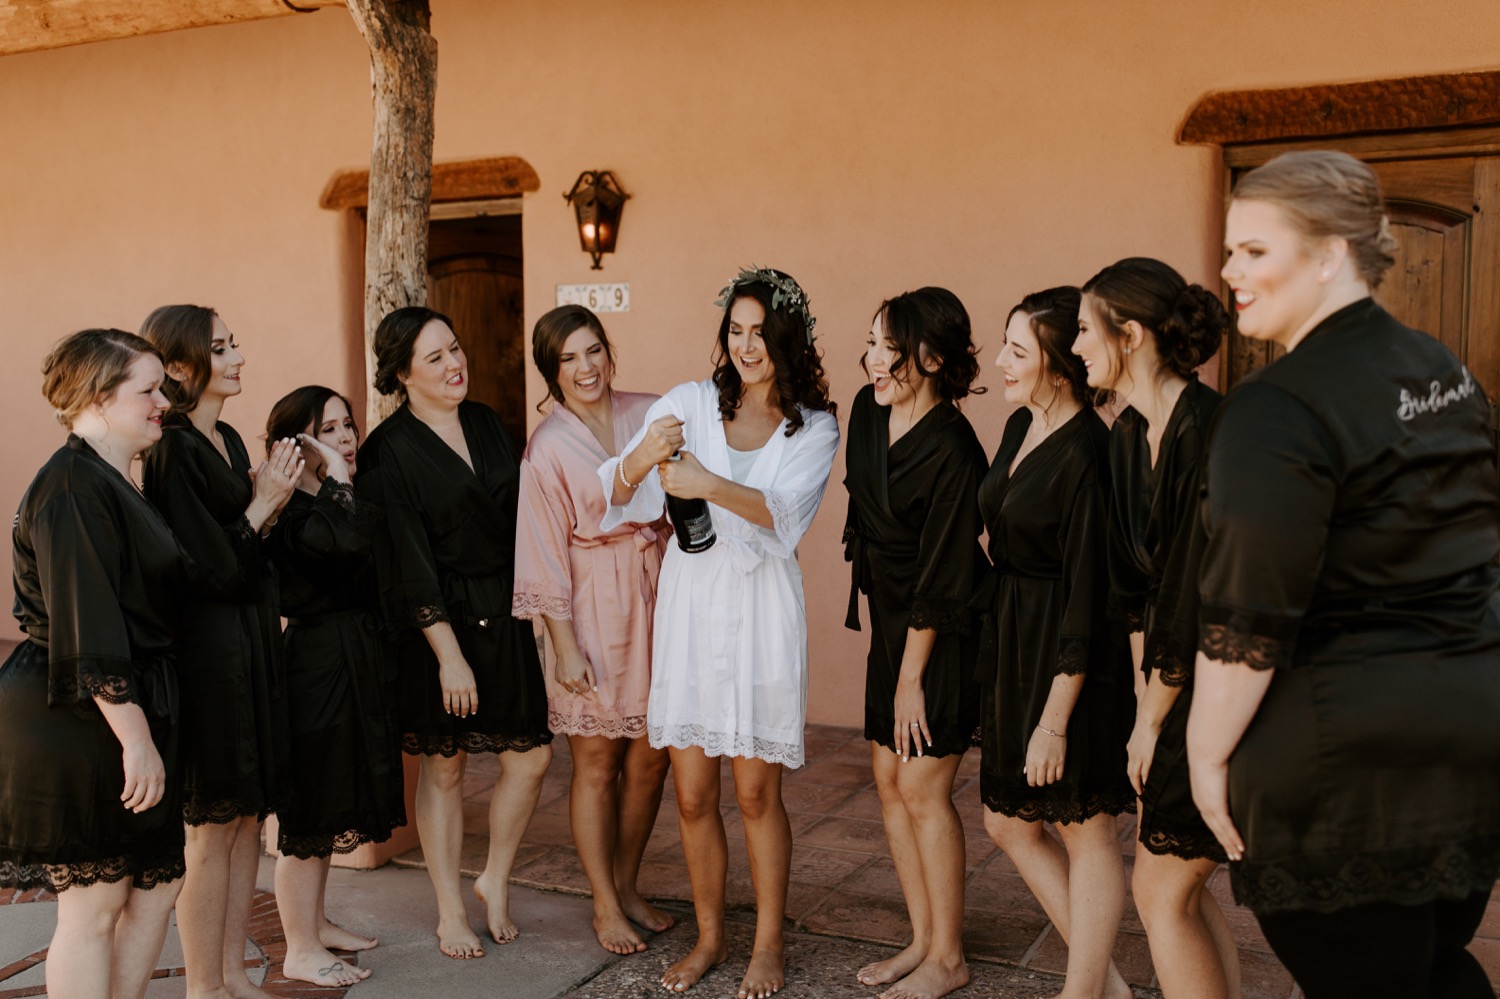 The bride with her bridesmaids popping some champagne before the ceremony